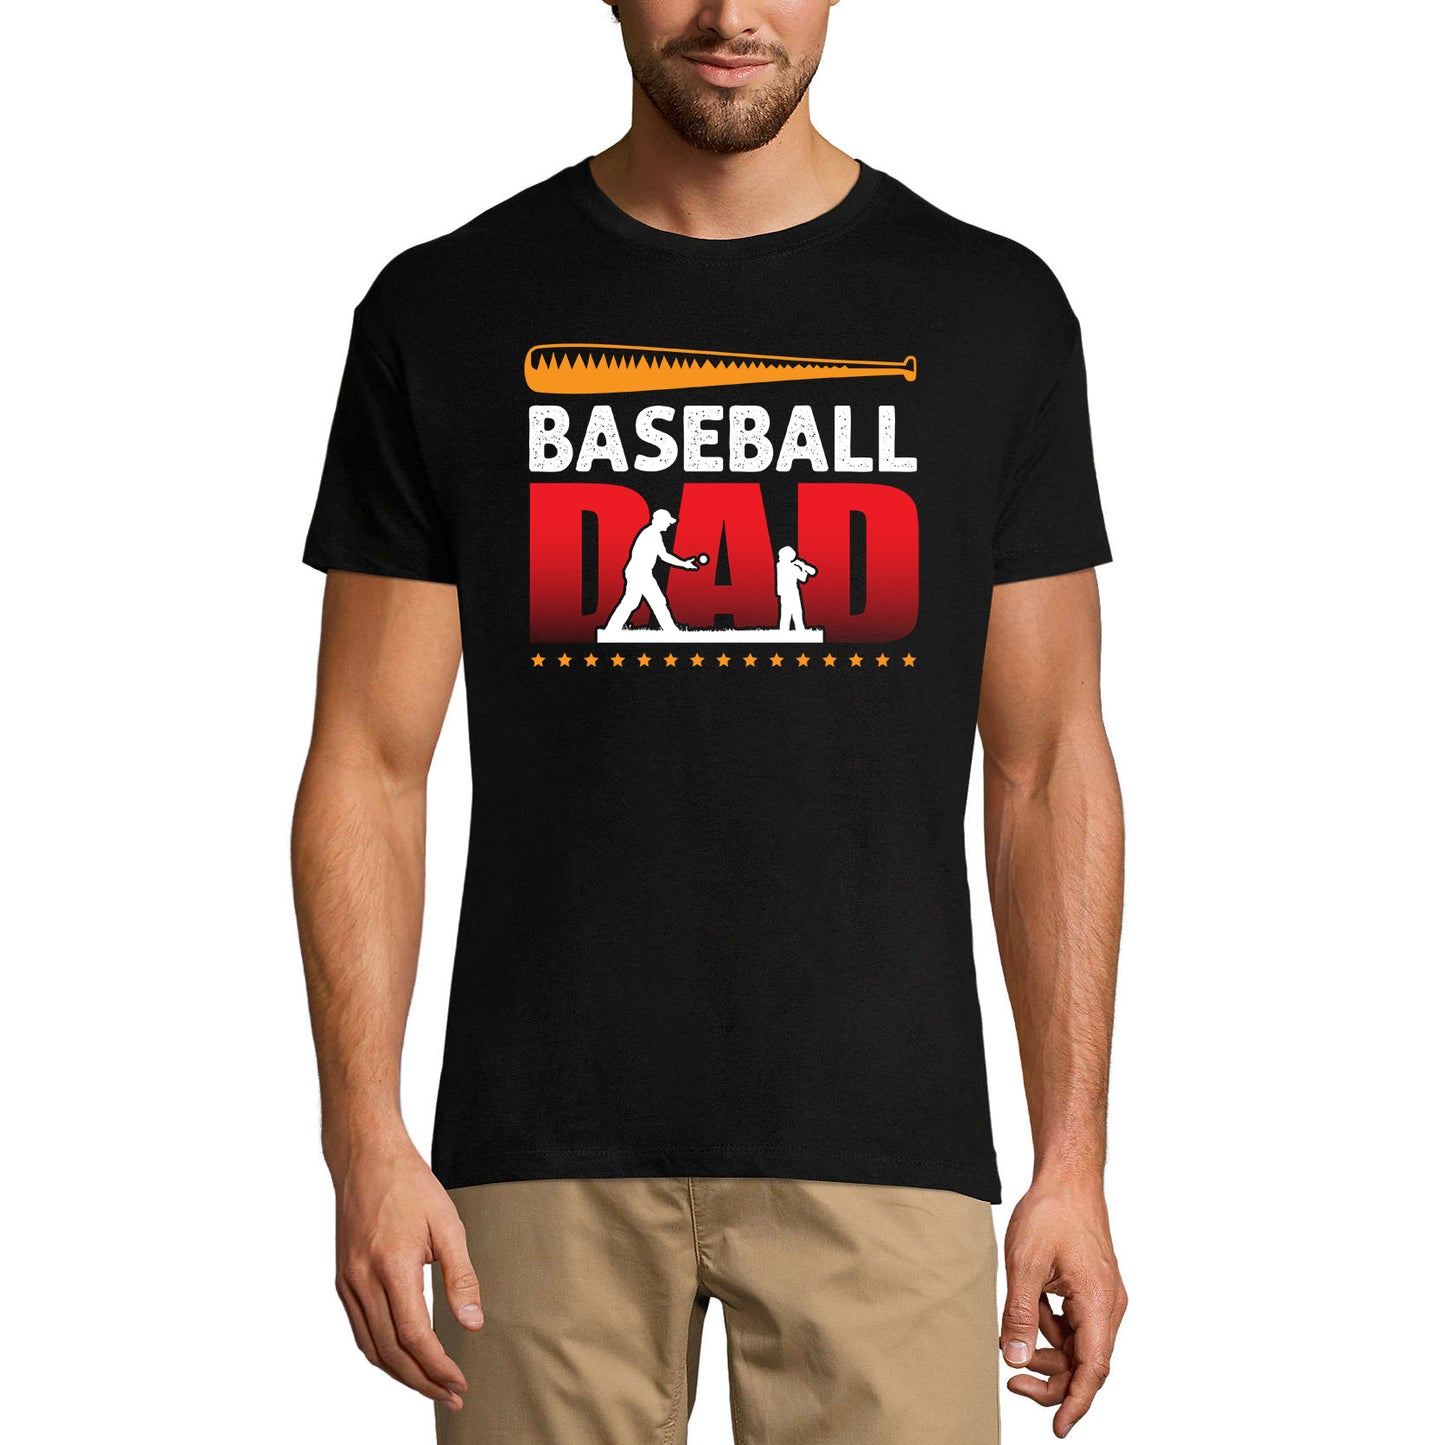 ULTRABASIC Men's Graphic T-Shirt Baseball Dad - Daddy And Son - Love Family